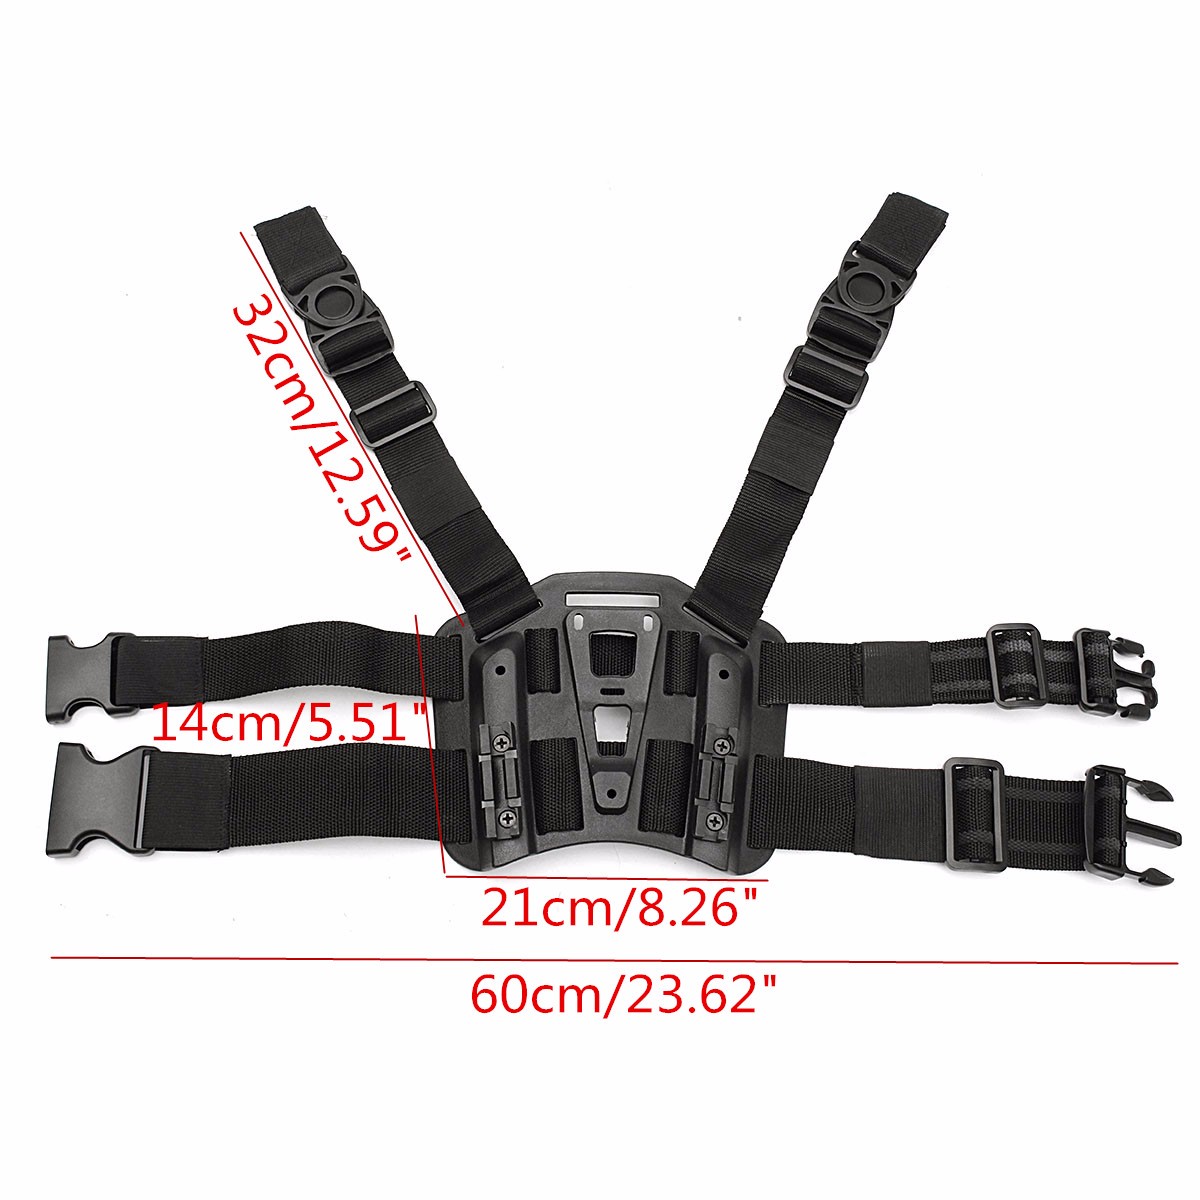 Tactical-Drop-Leg-Thigh-Rig-Holster-Platform-Panel-Plate-For-SERPA-CQC-Holsters-1243352-1